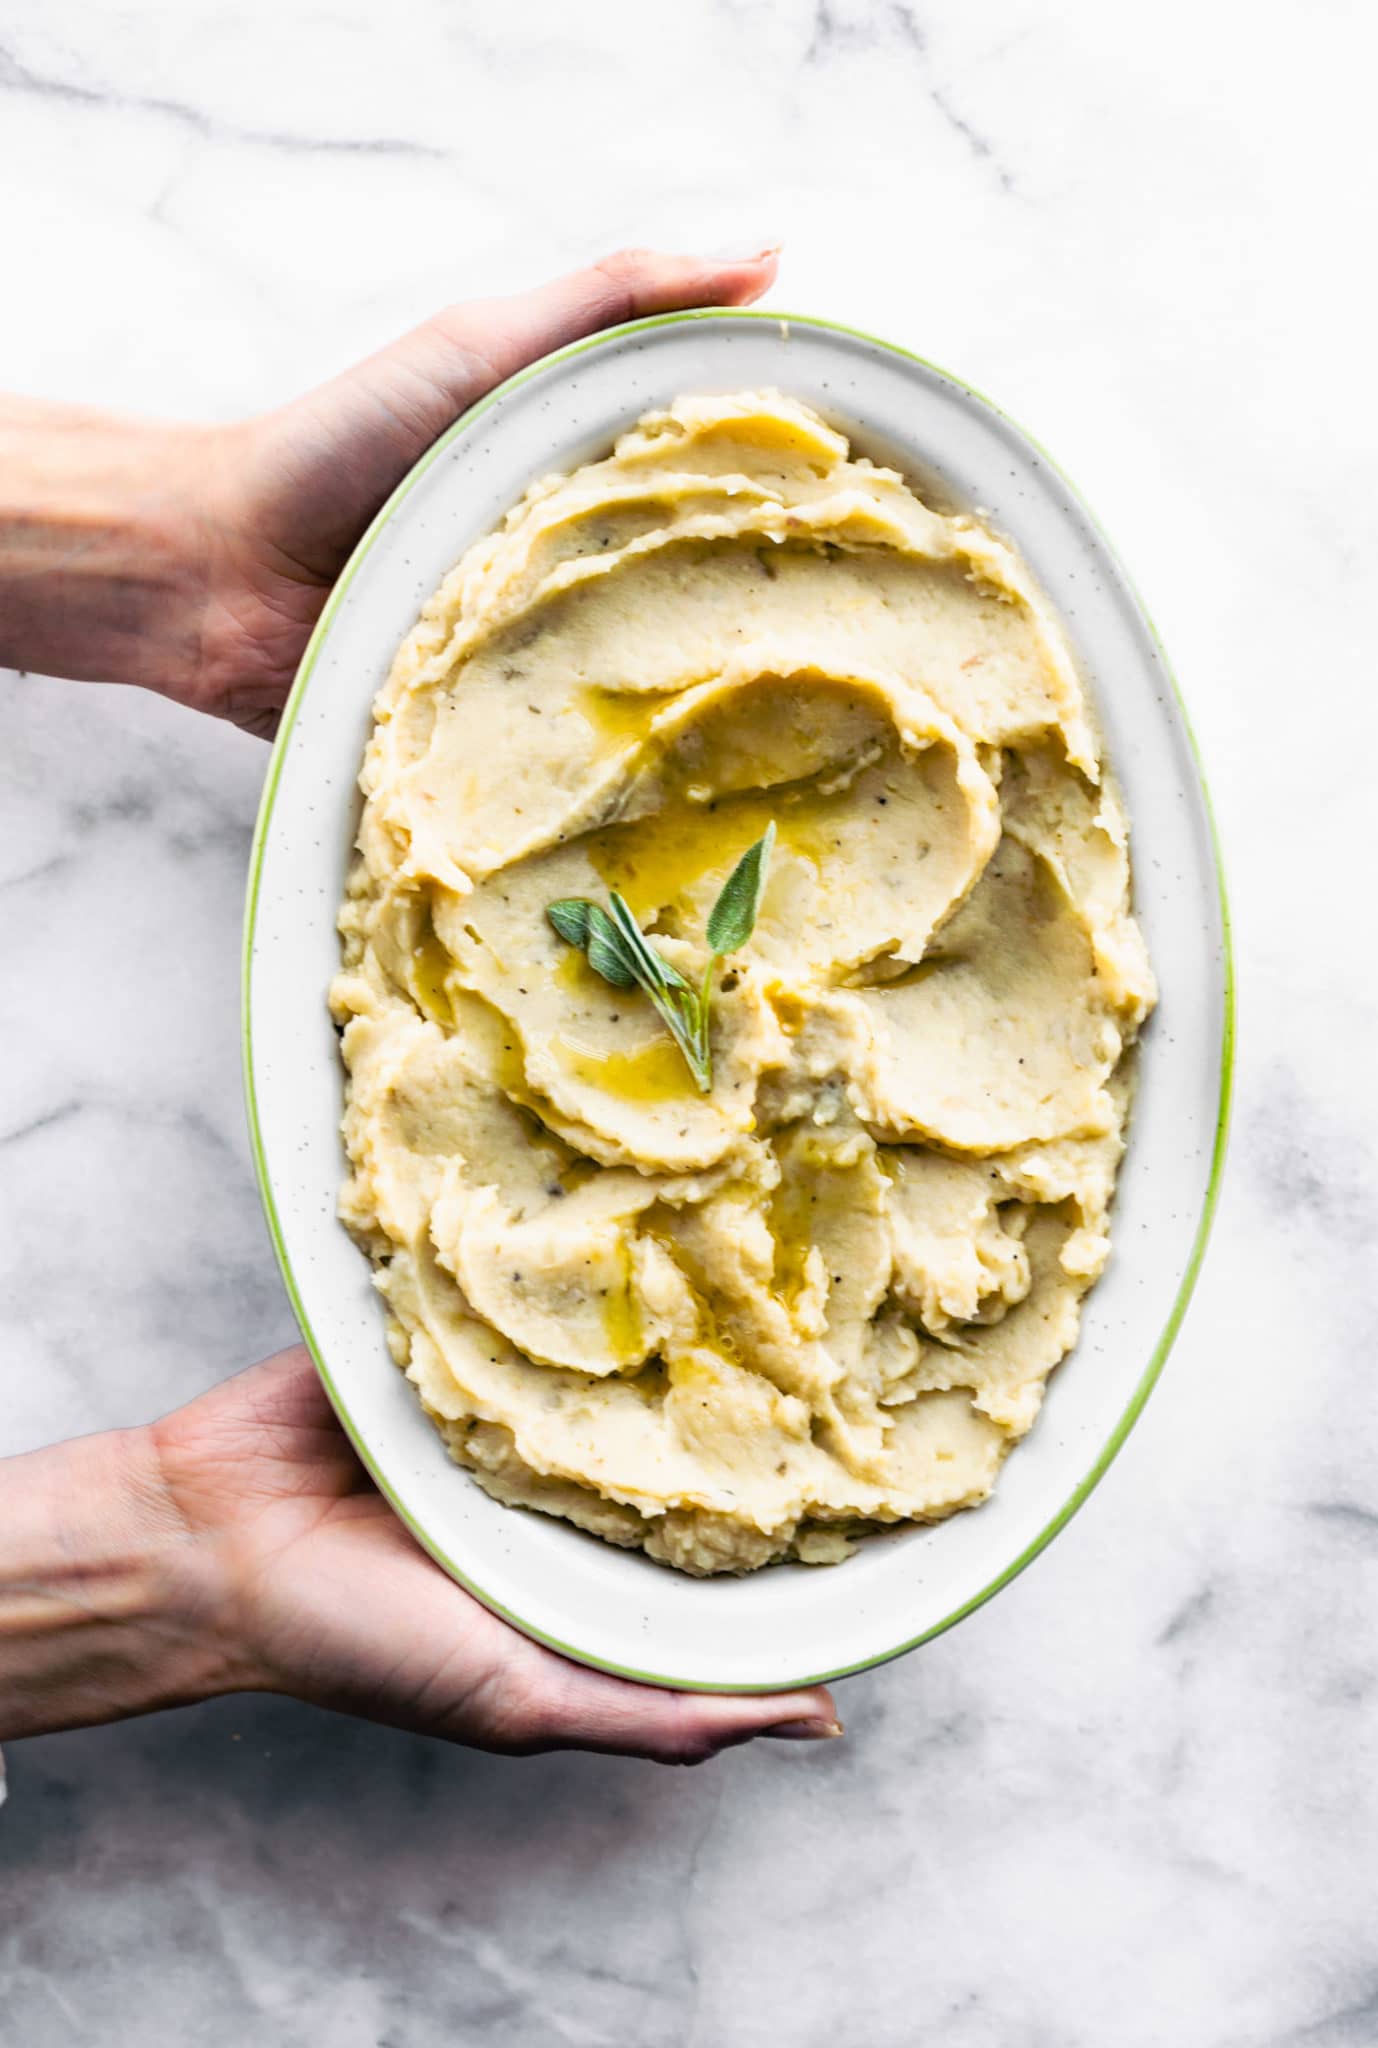 Two hands holding a platter of slow cooker dairy free mashed potatoes topped with fresh herbs